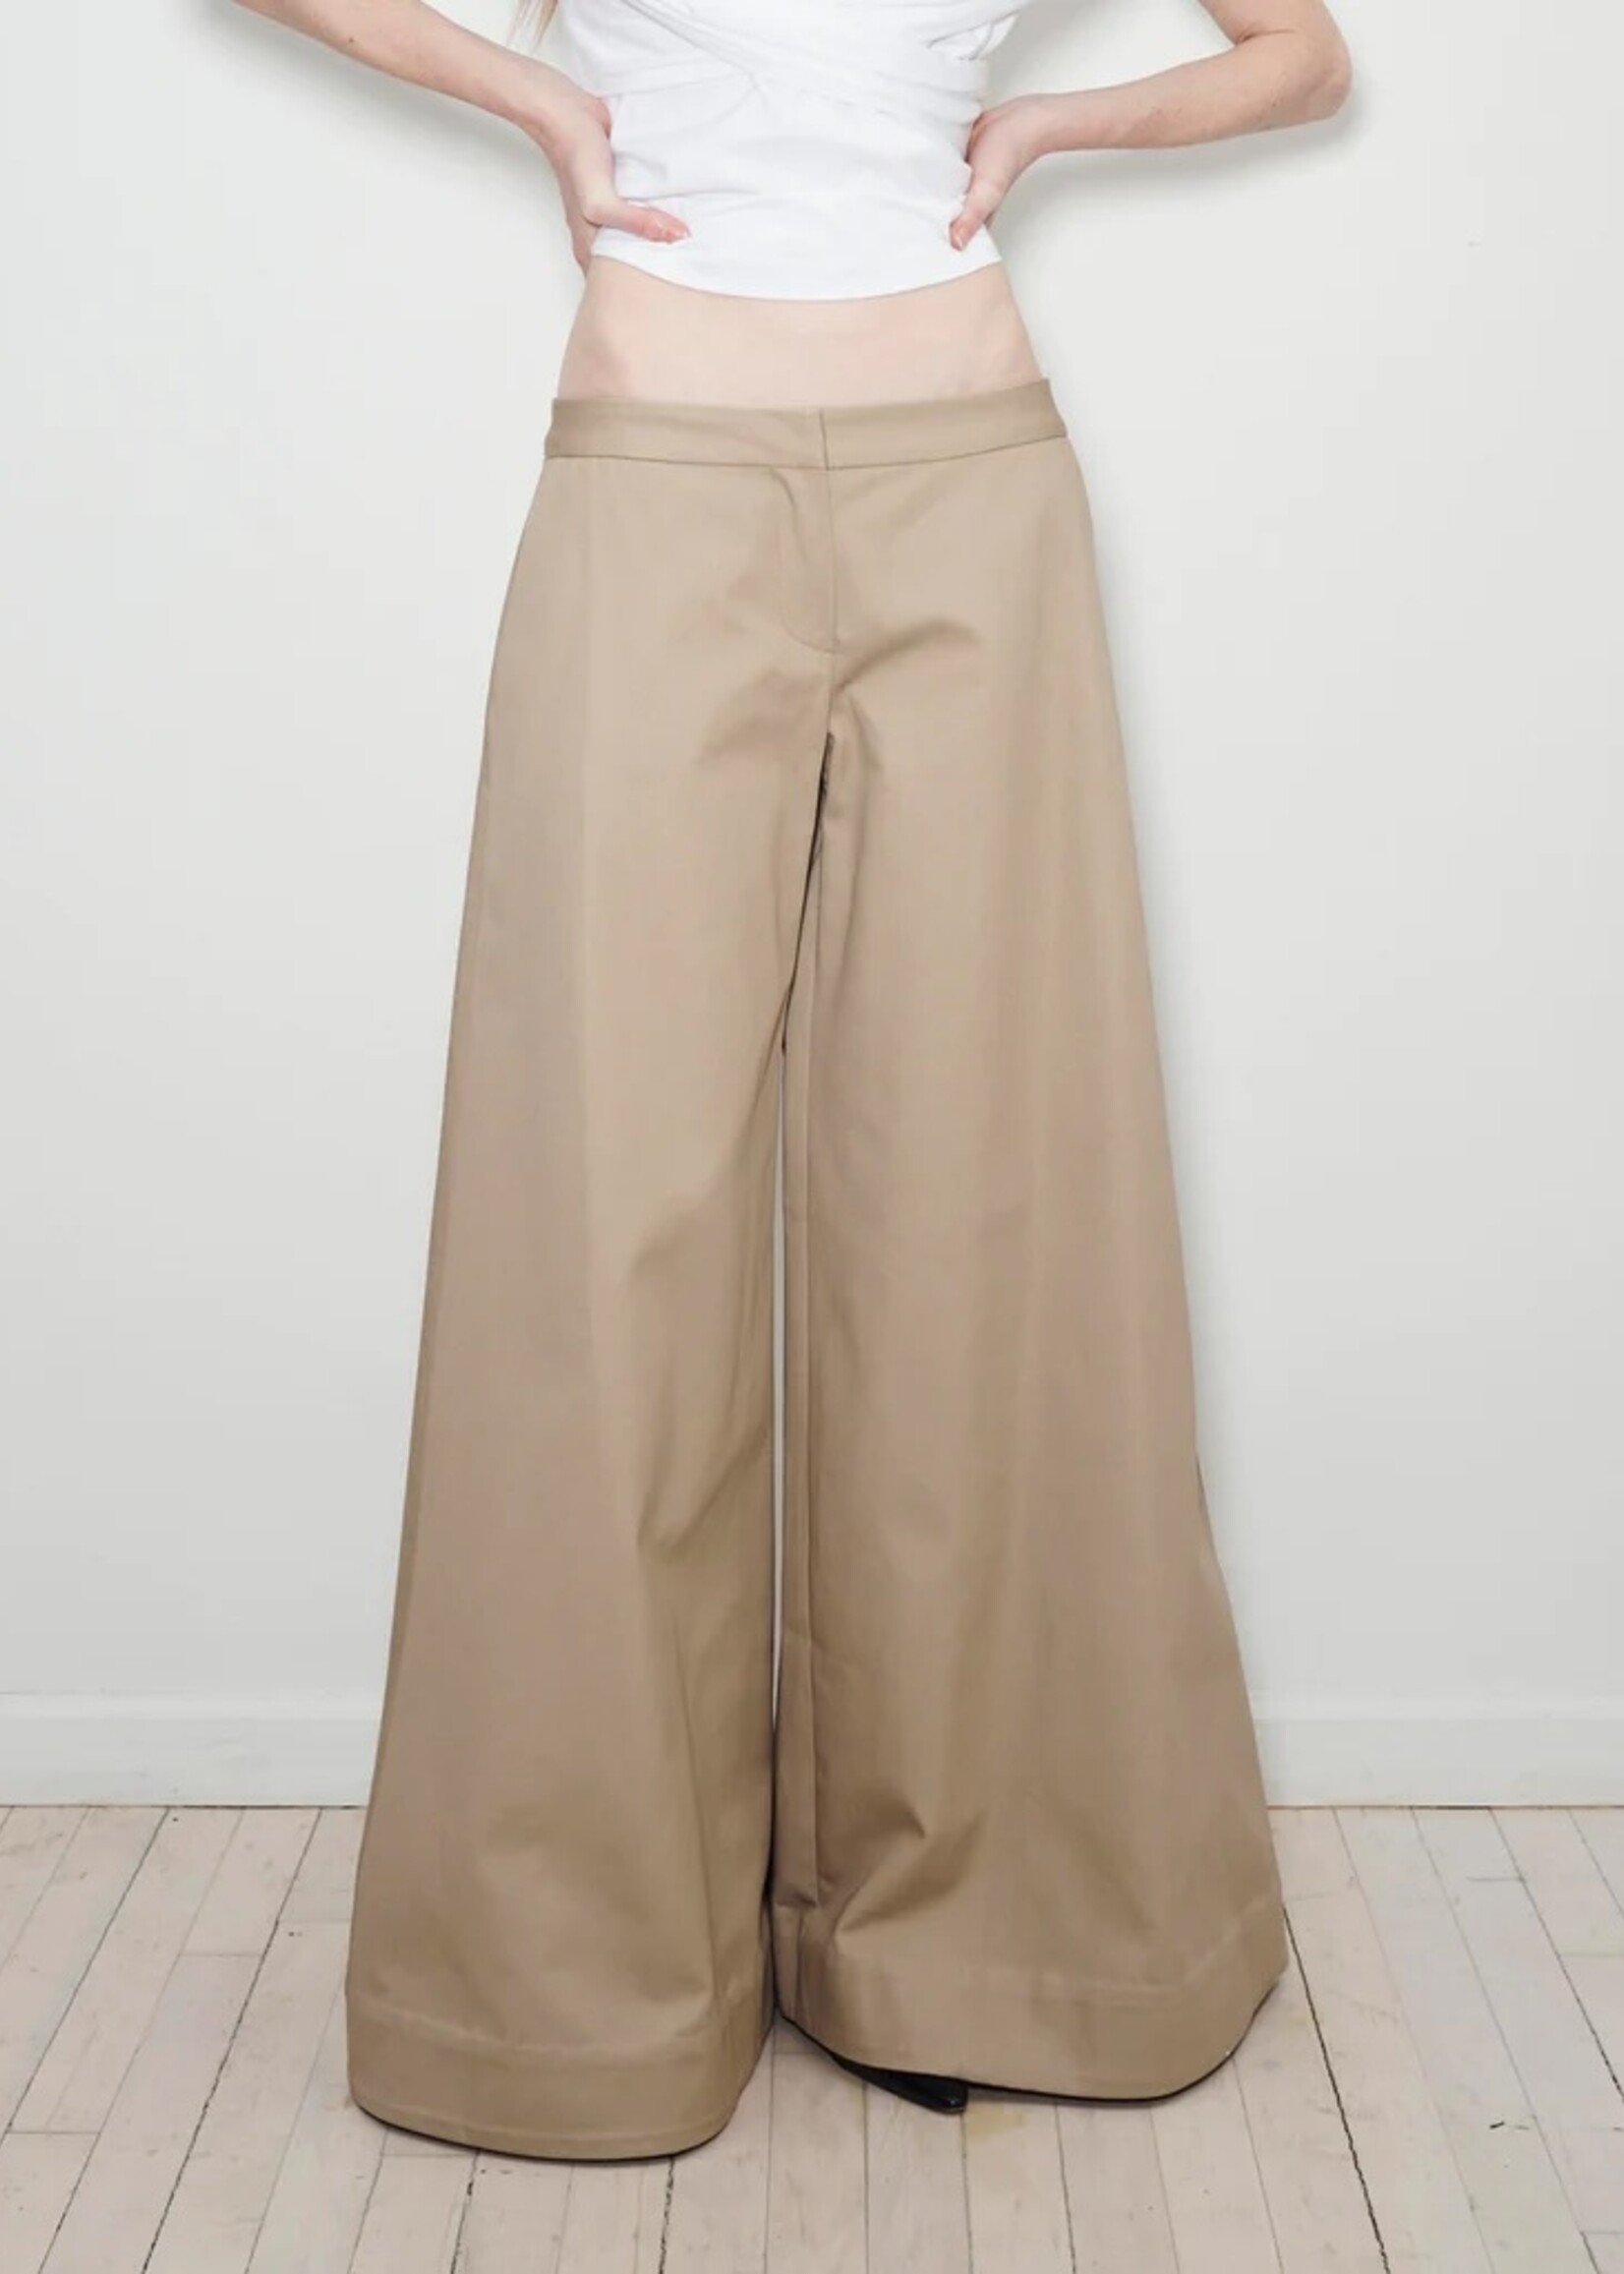 PUPPETS AND PUPPETS Rave Trouser in Tan